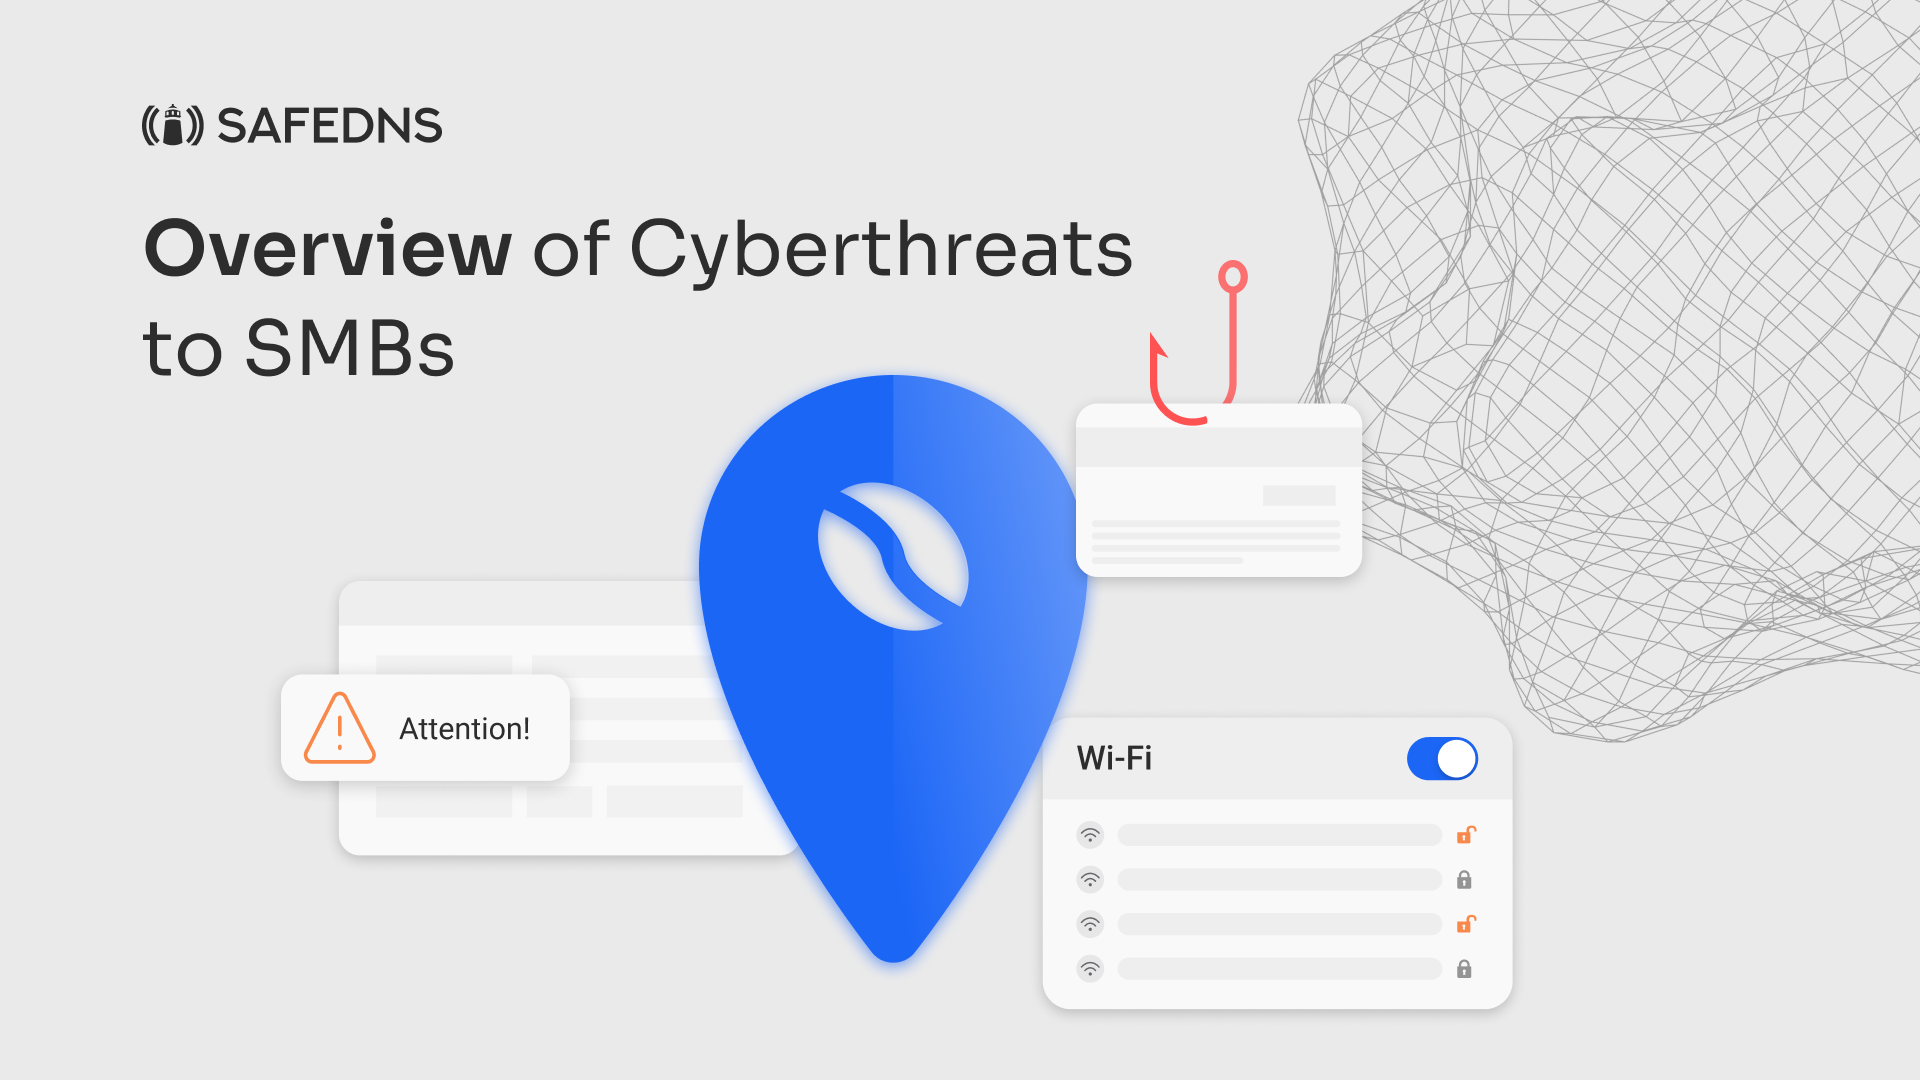 Overview of Cyberthreats to SMBs